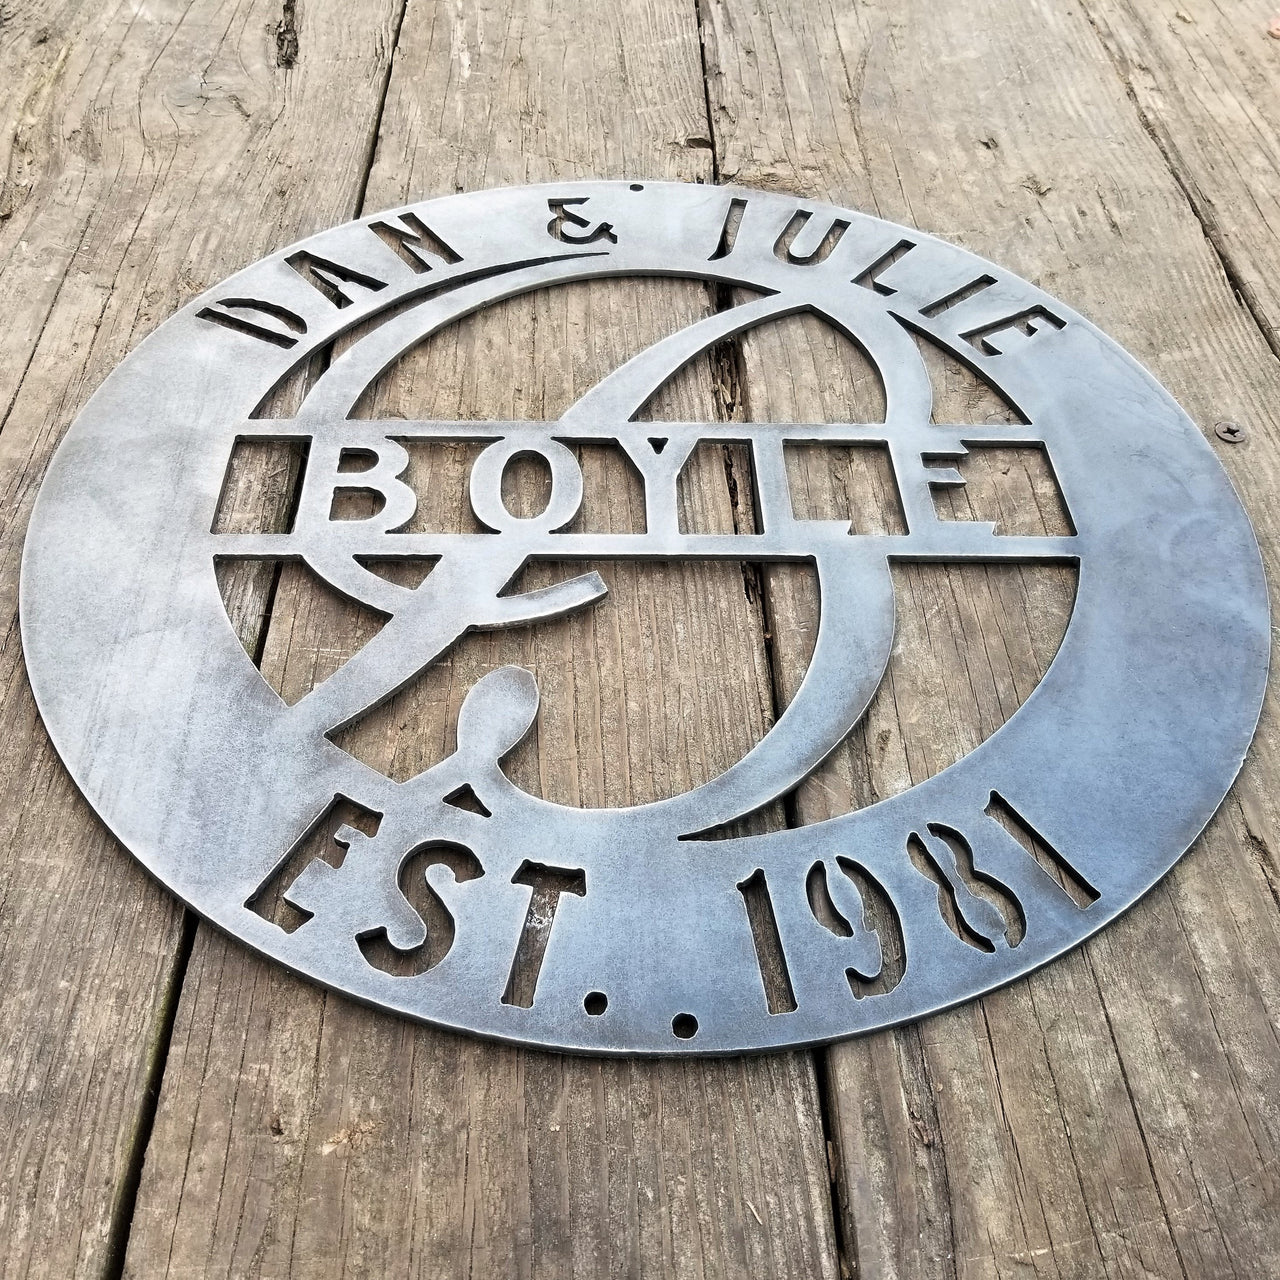 This is a round metal wedding monogram with 1/4"holes for hanging that reads, " Dan & Julie, Boyle, Established 1981"